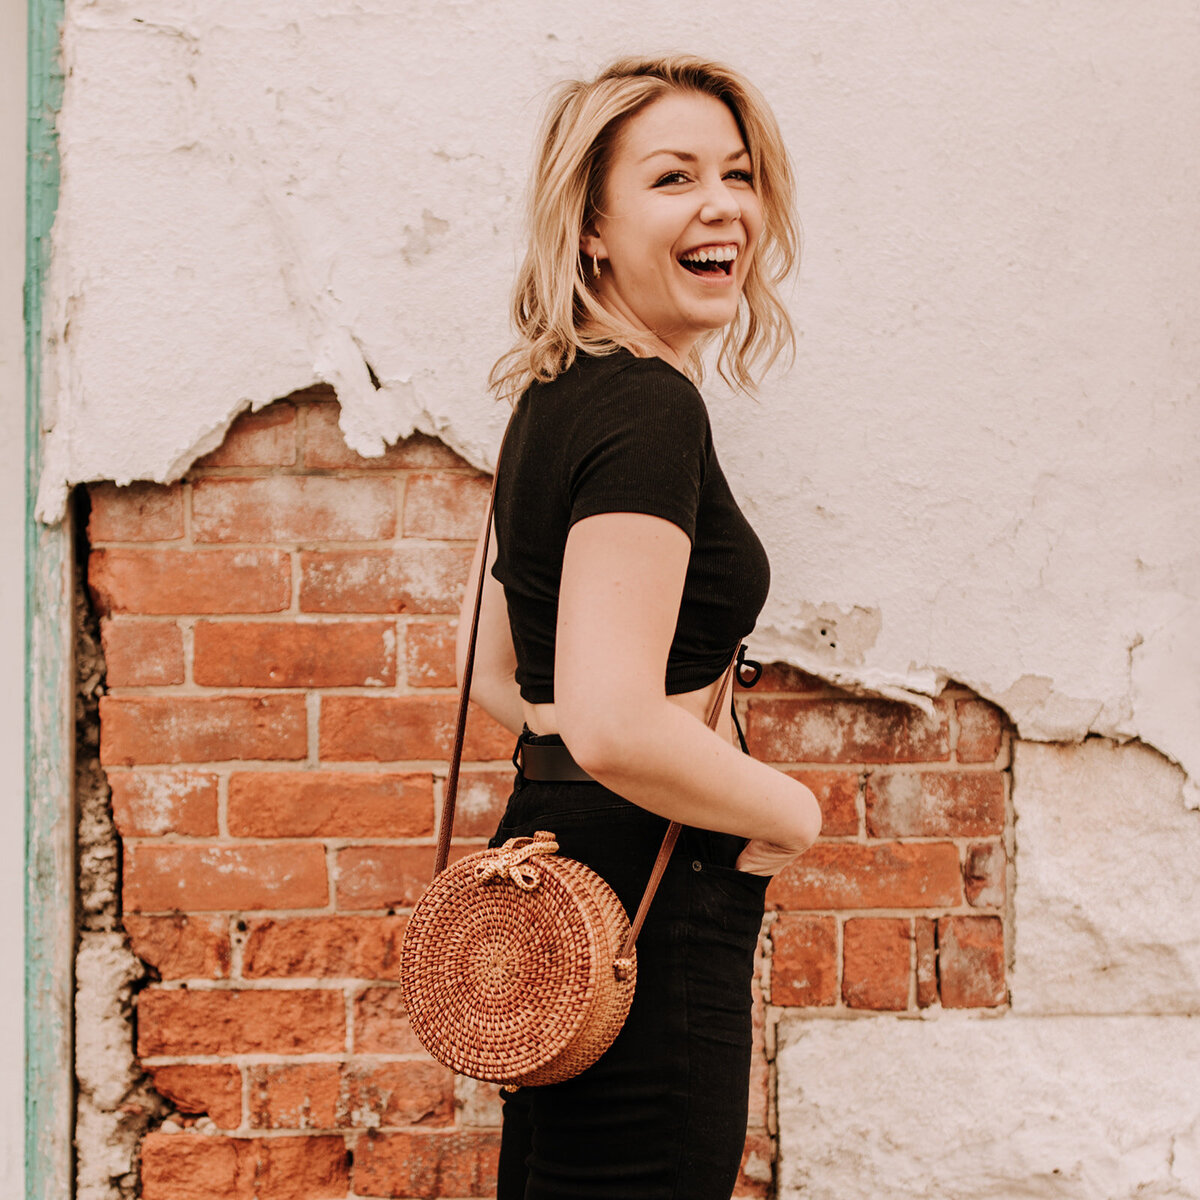 A woman laughs while standing in front of a brick wall.